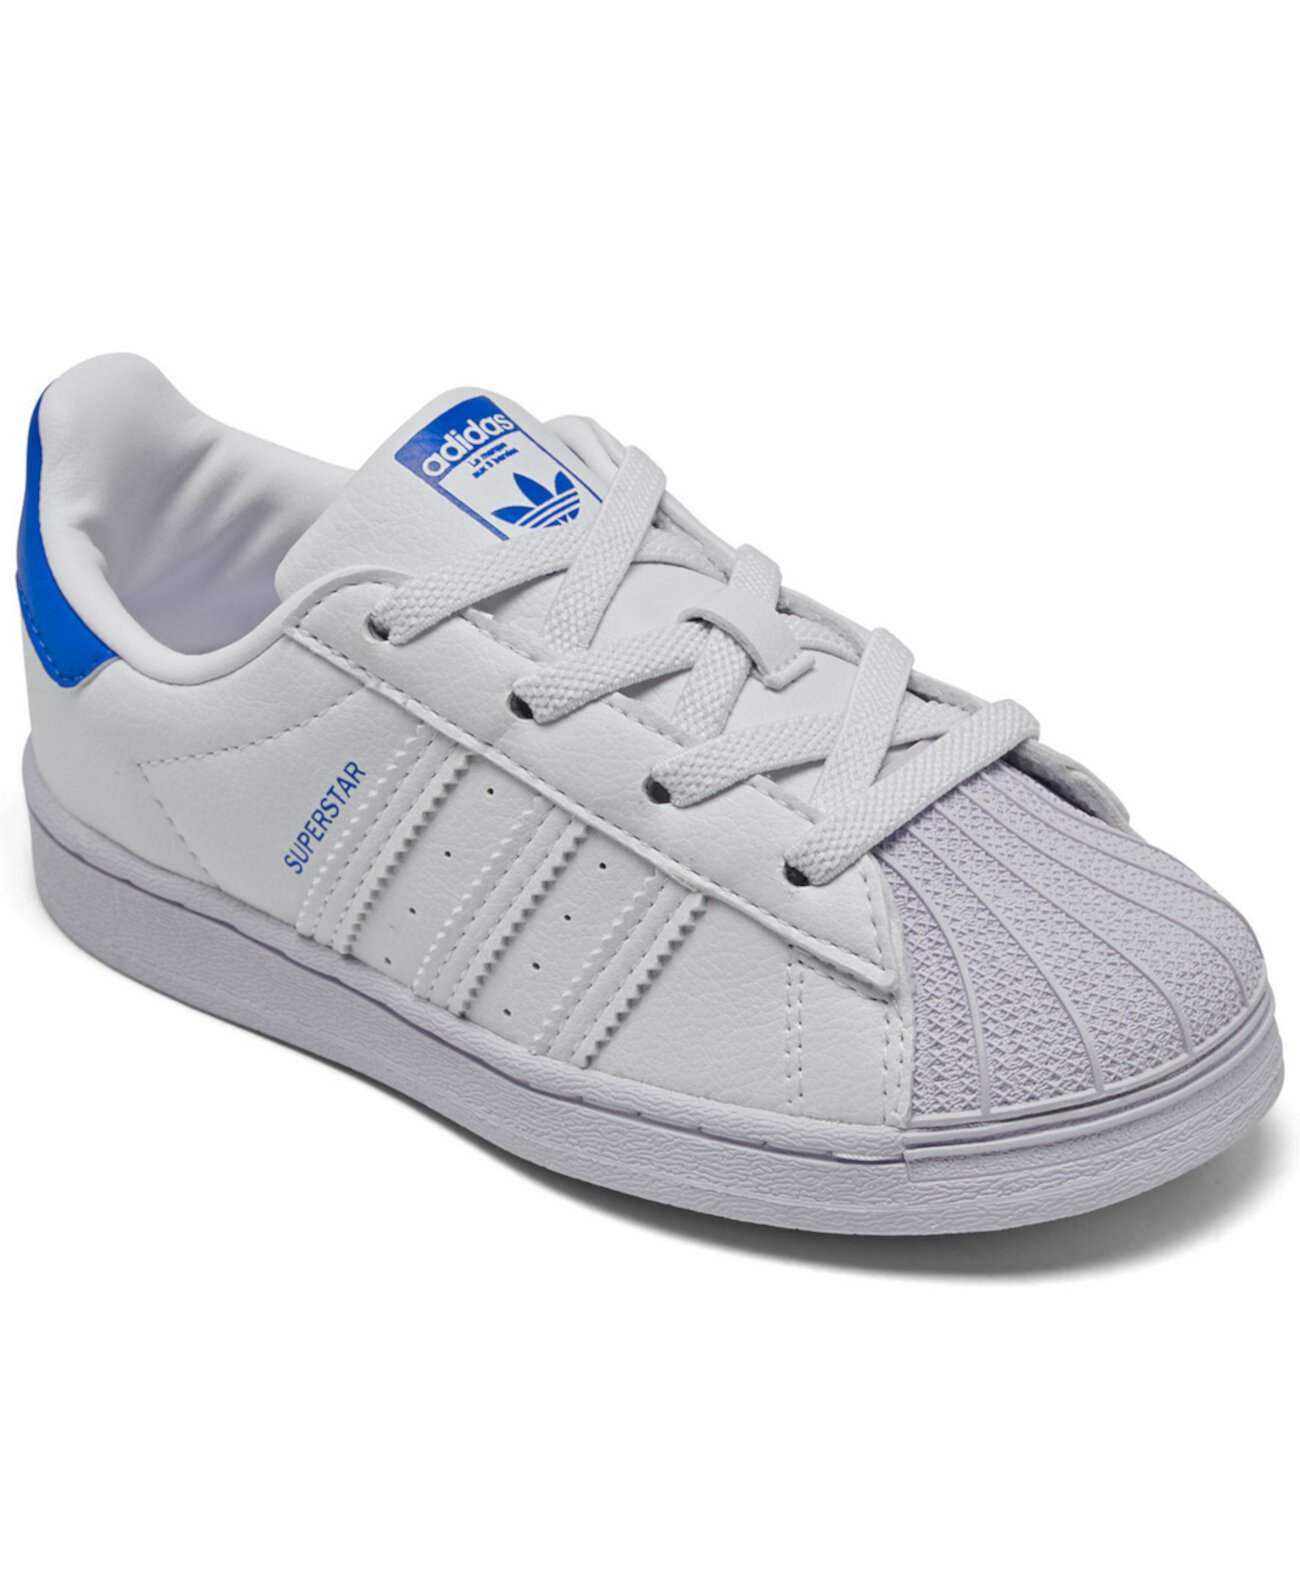 Toddler Boys Superstar Sneakers from Finish Line Adidas